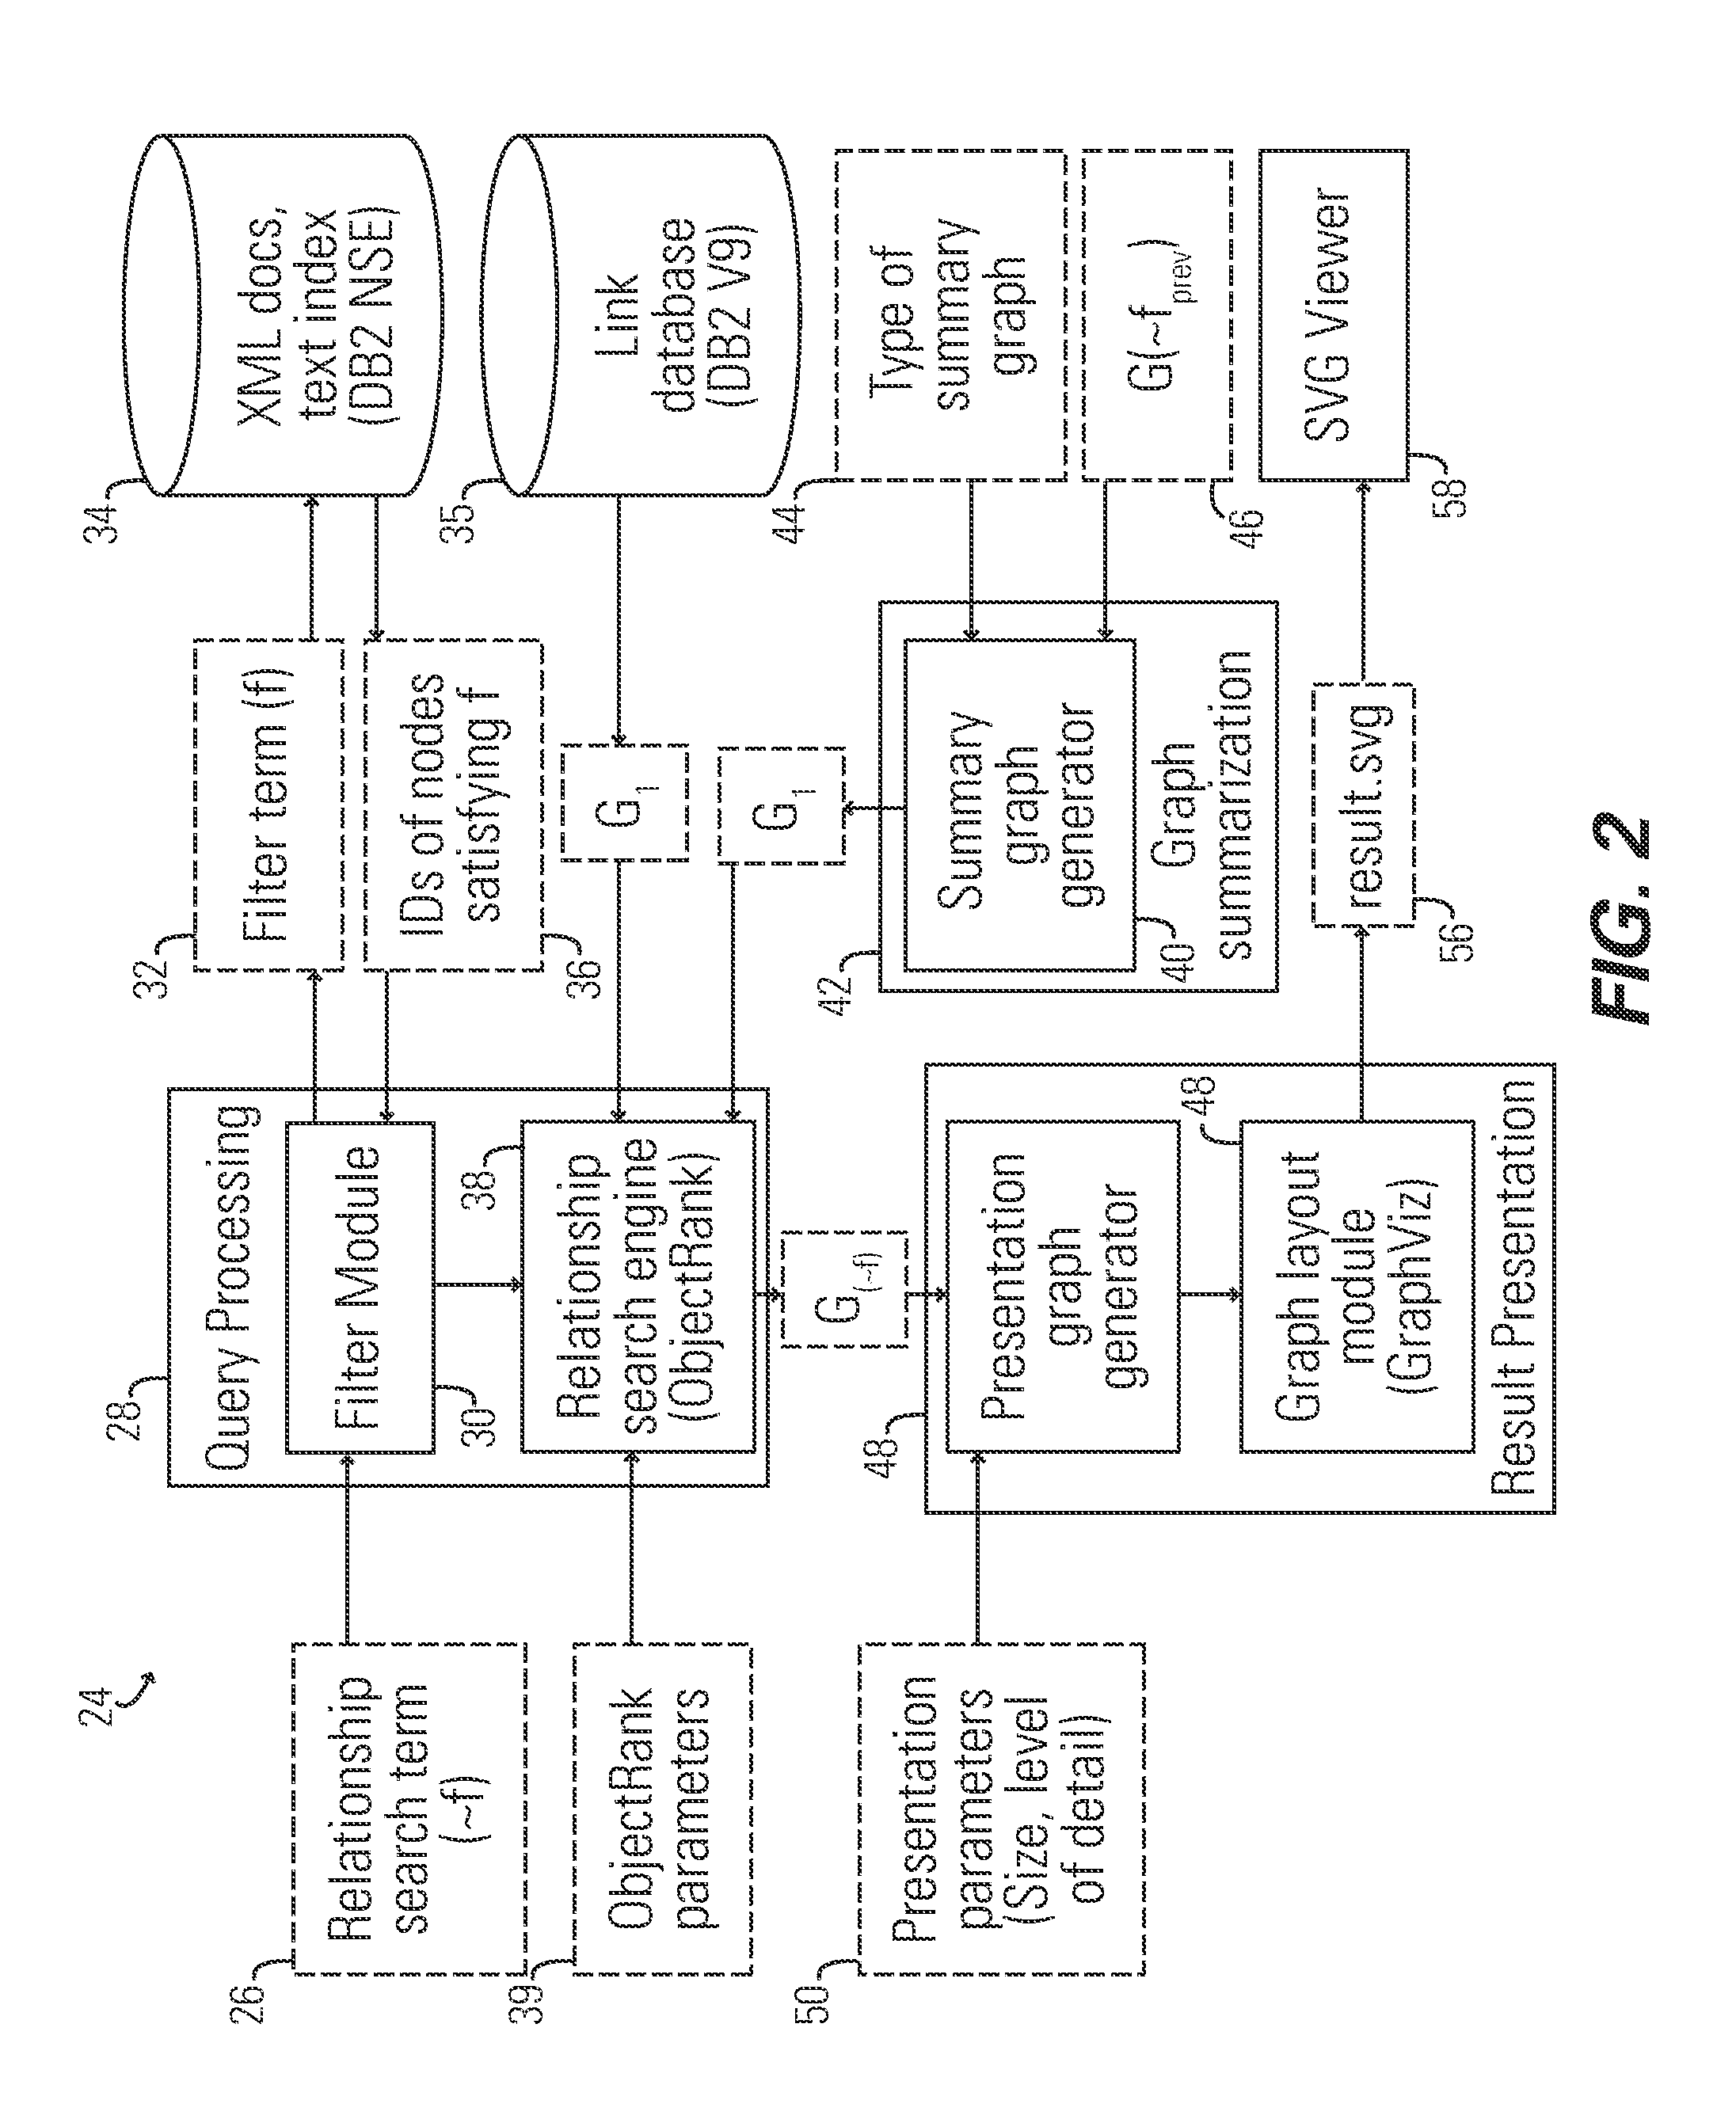 Graph search system and method for querying loosely integrated data